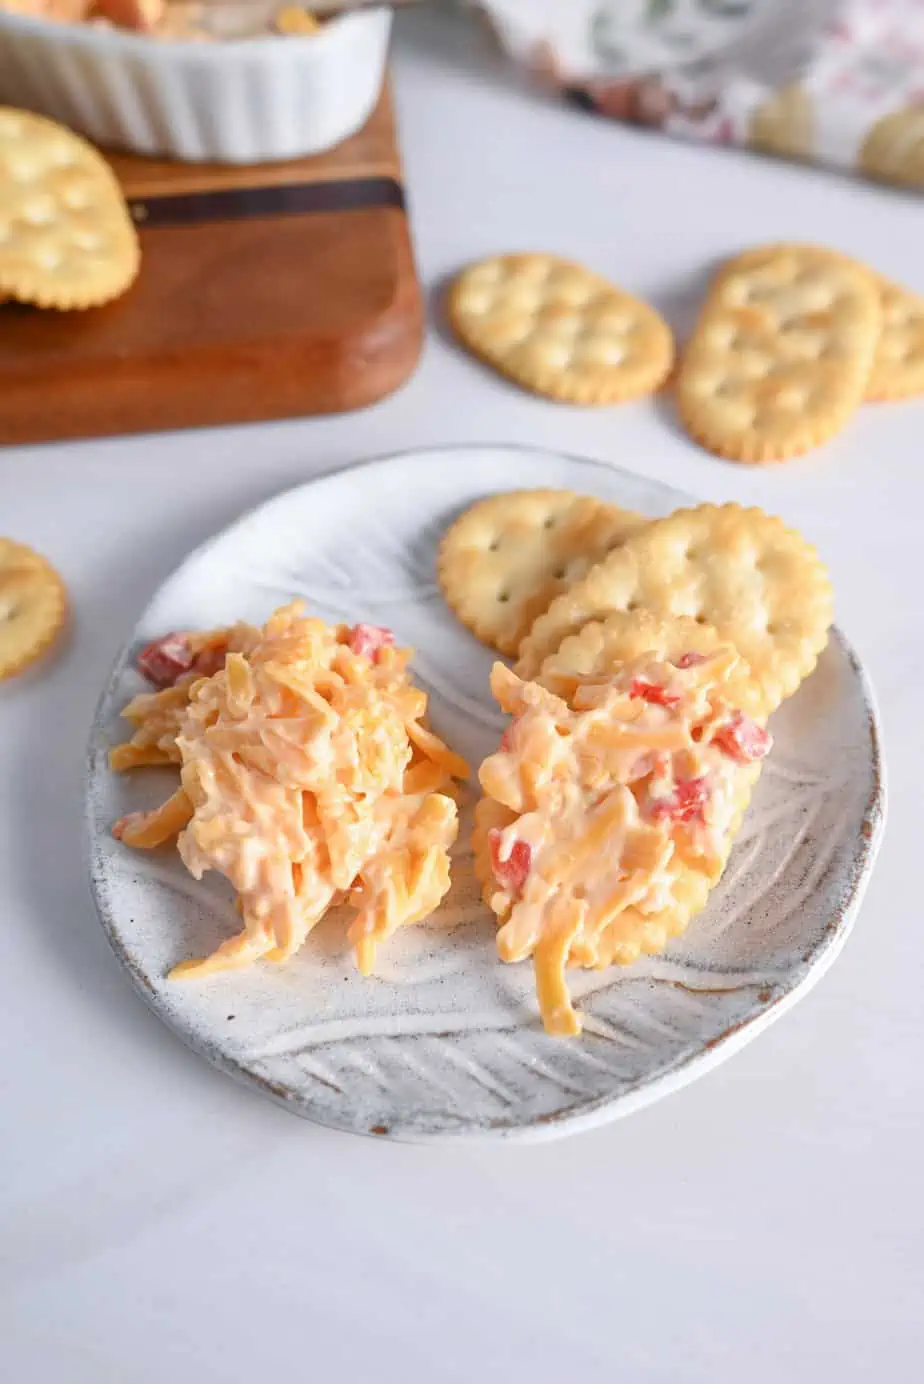 Pimento cheese and crackers on a small white plate.